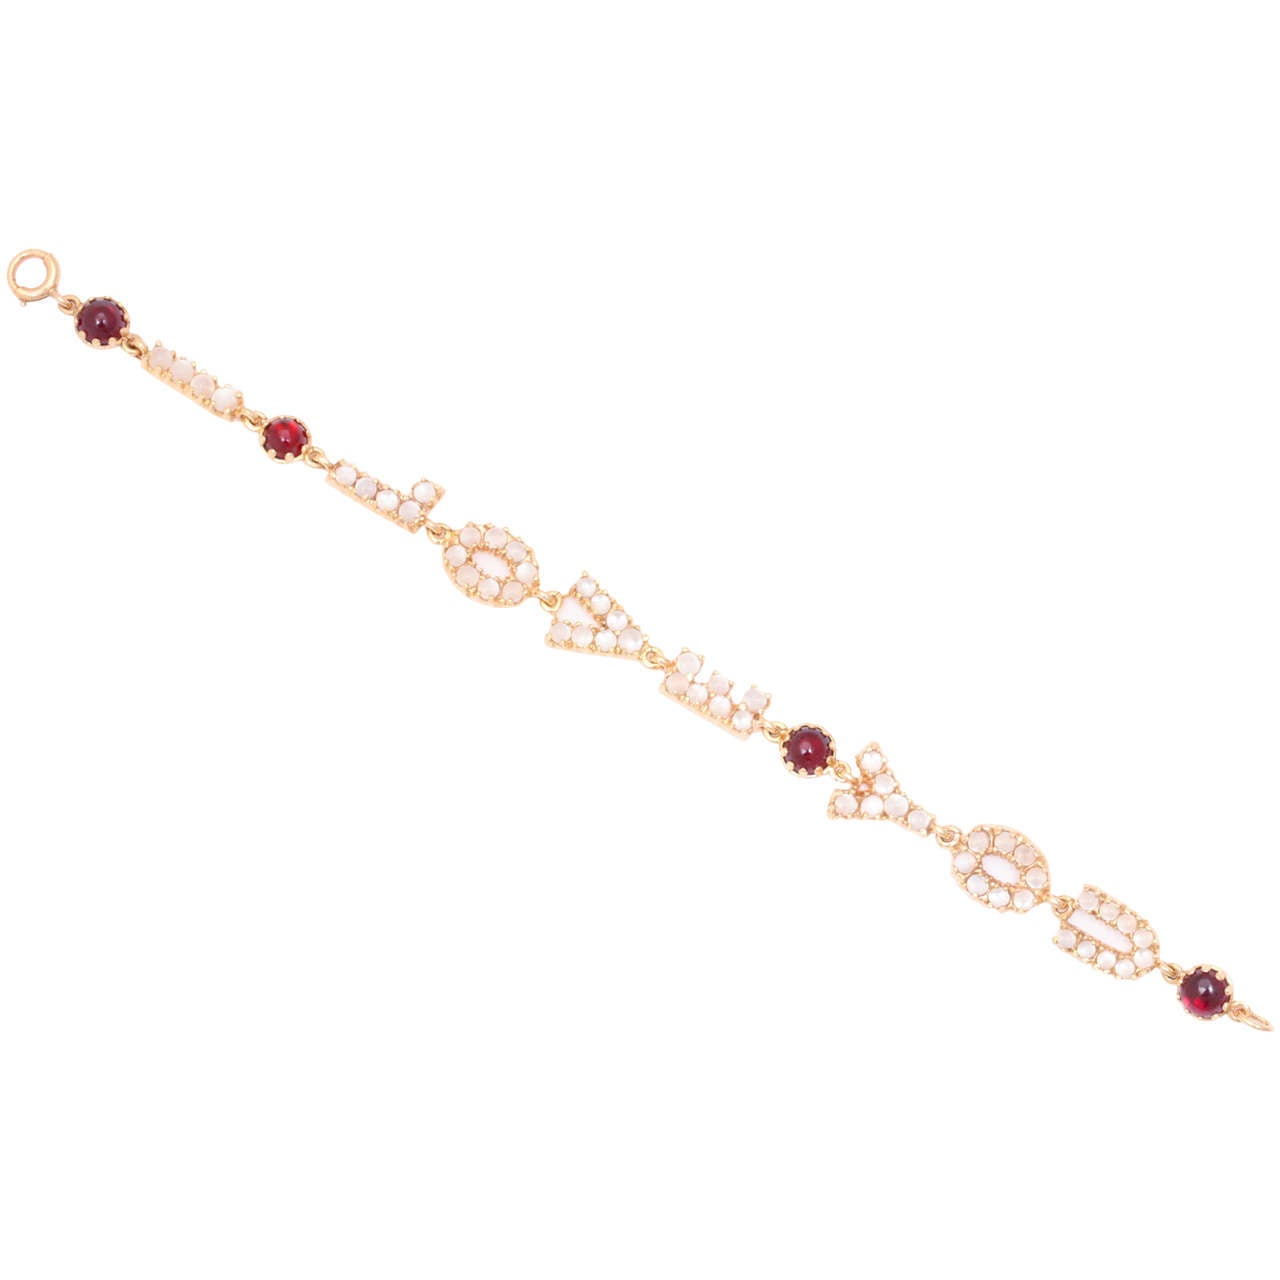 A delicate charm of a bracelet in 14kt gold carries the heart warming words 